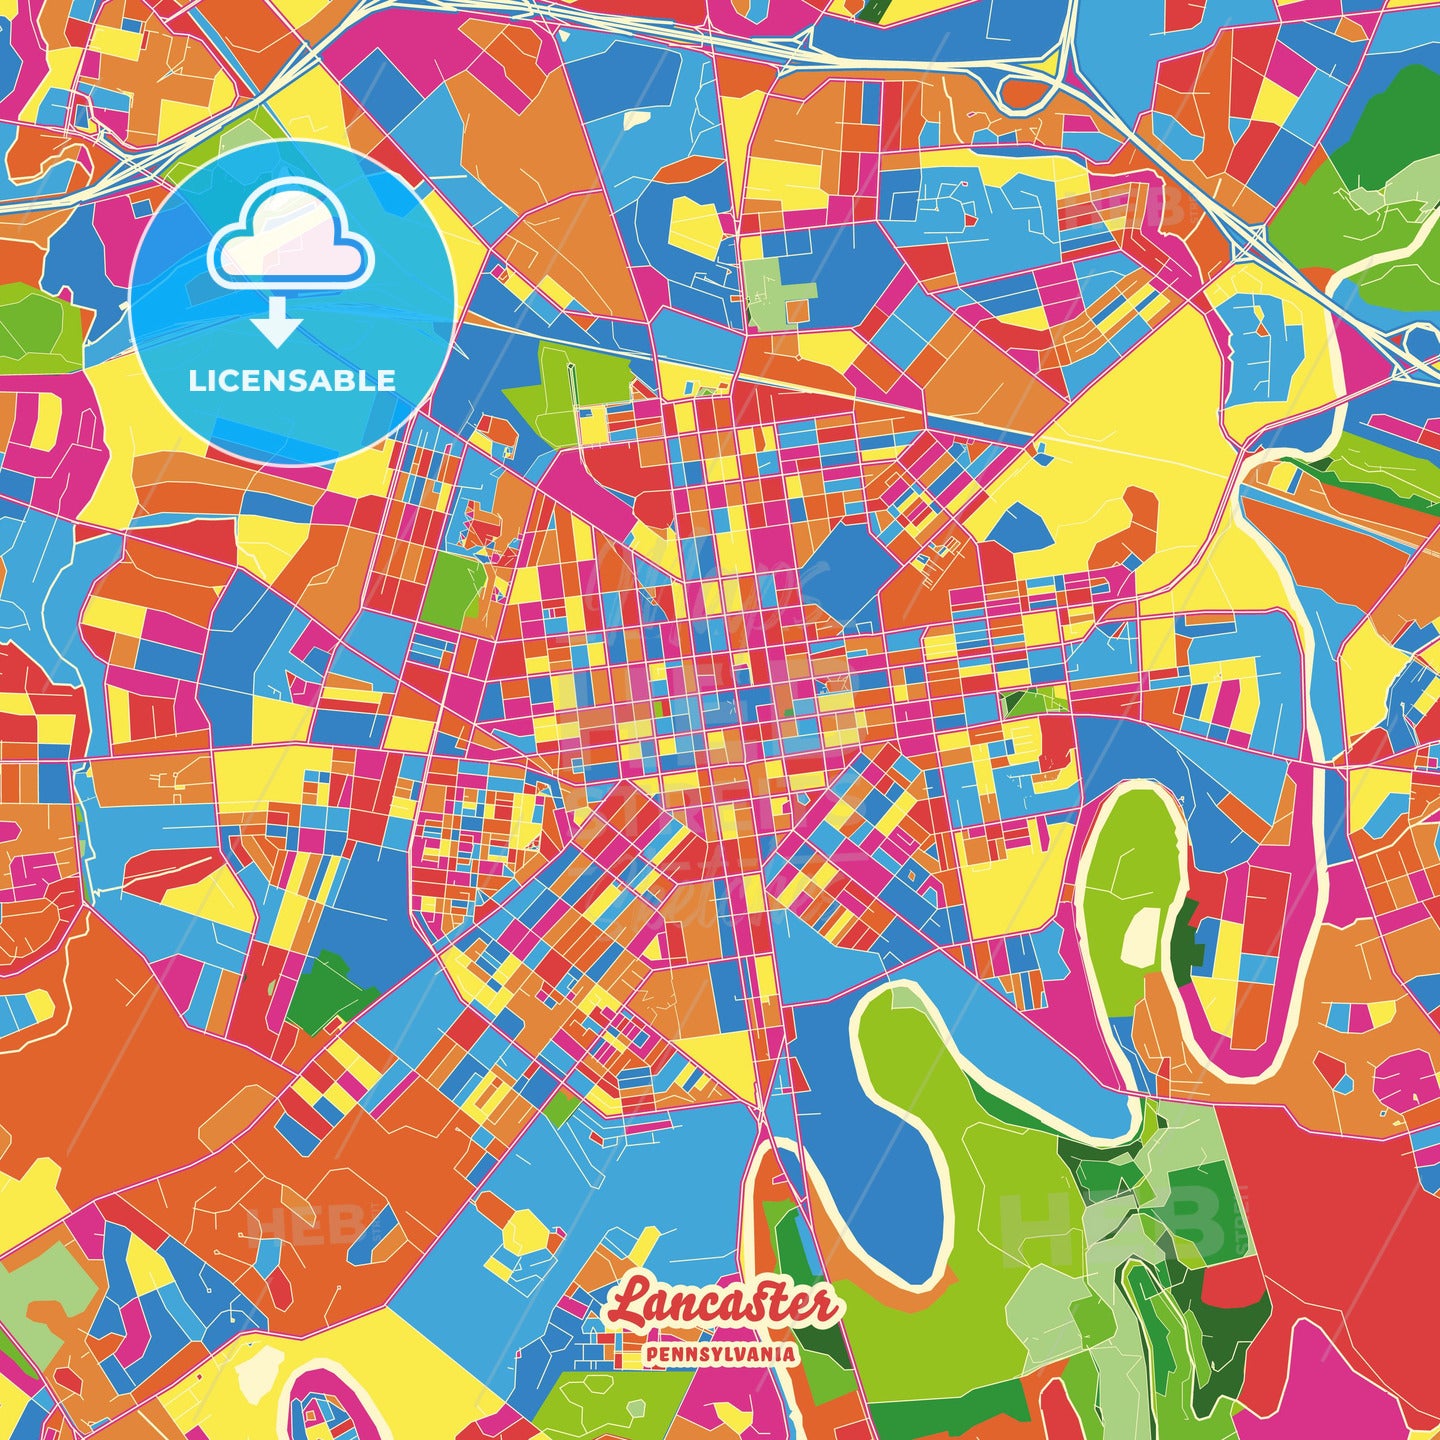 Lancaster, United States Crazy Colorful Street Map Poster Template - HEBSTREITS Sketches